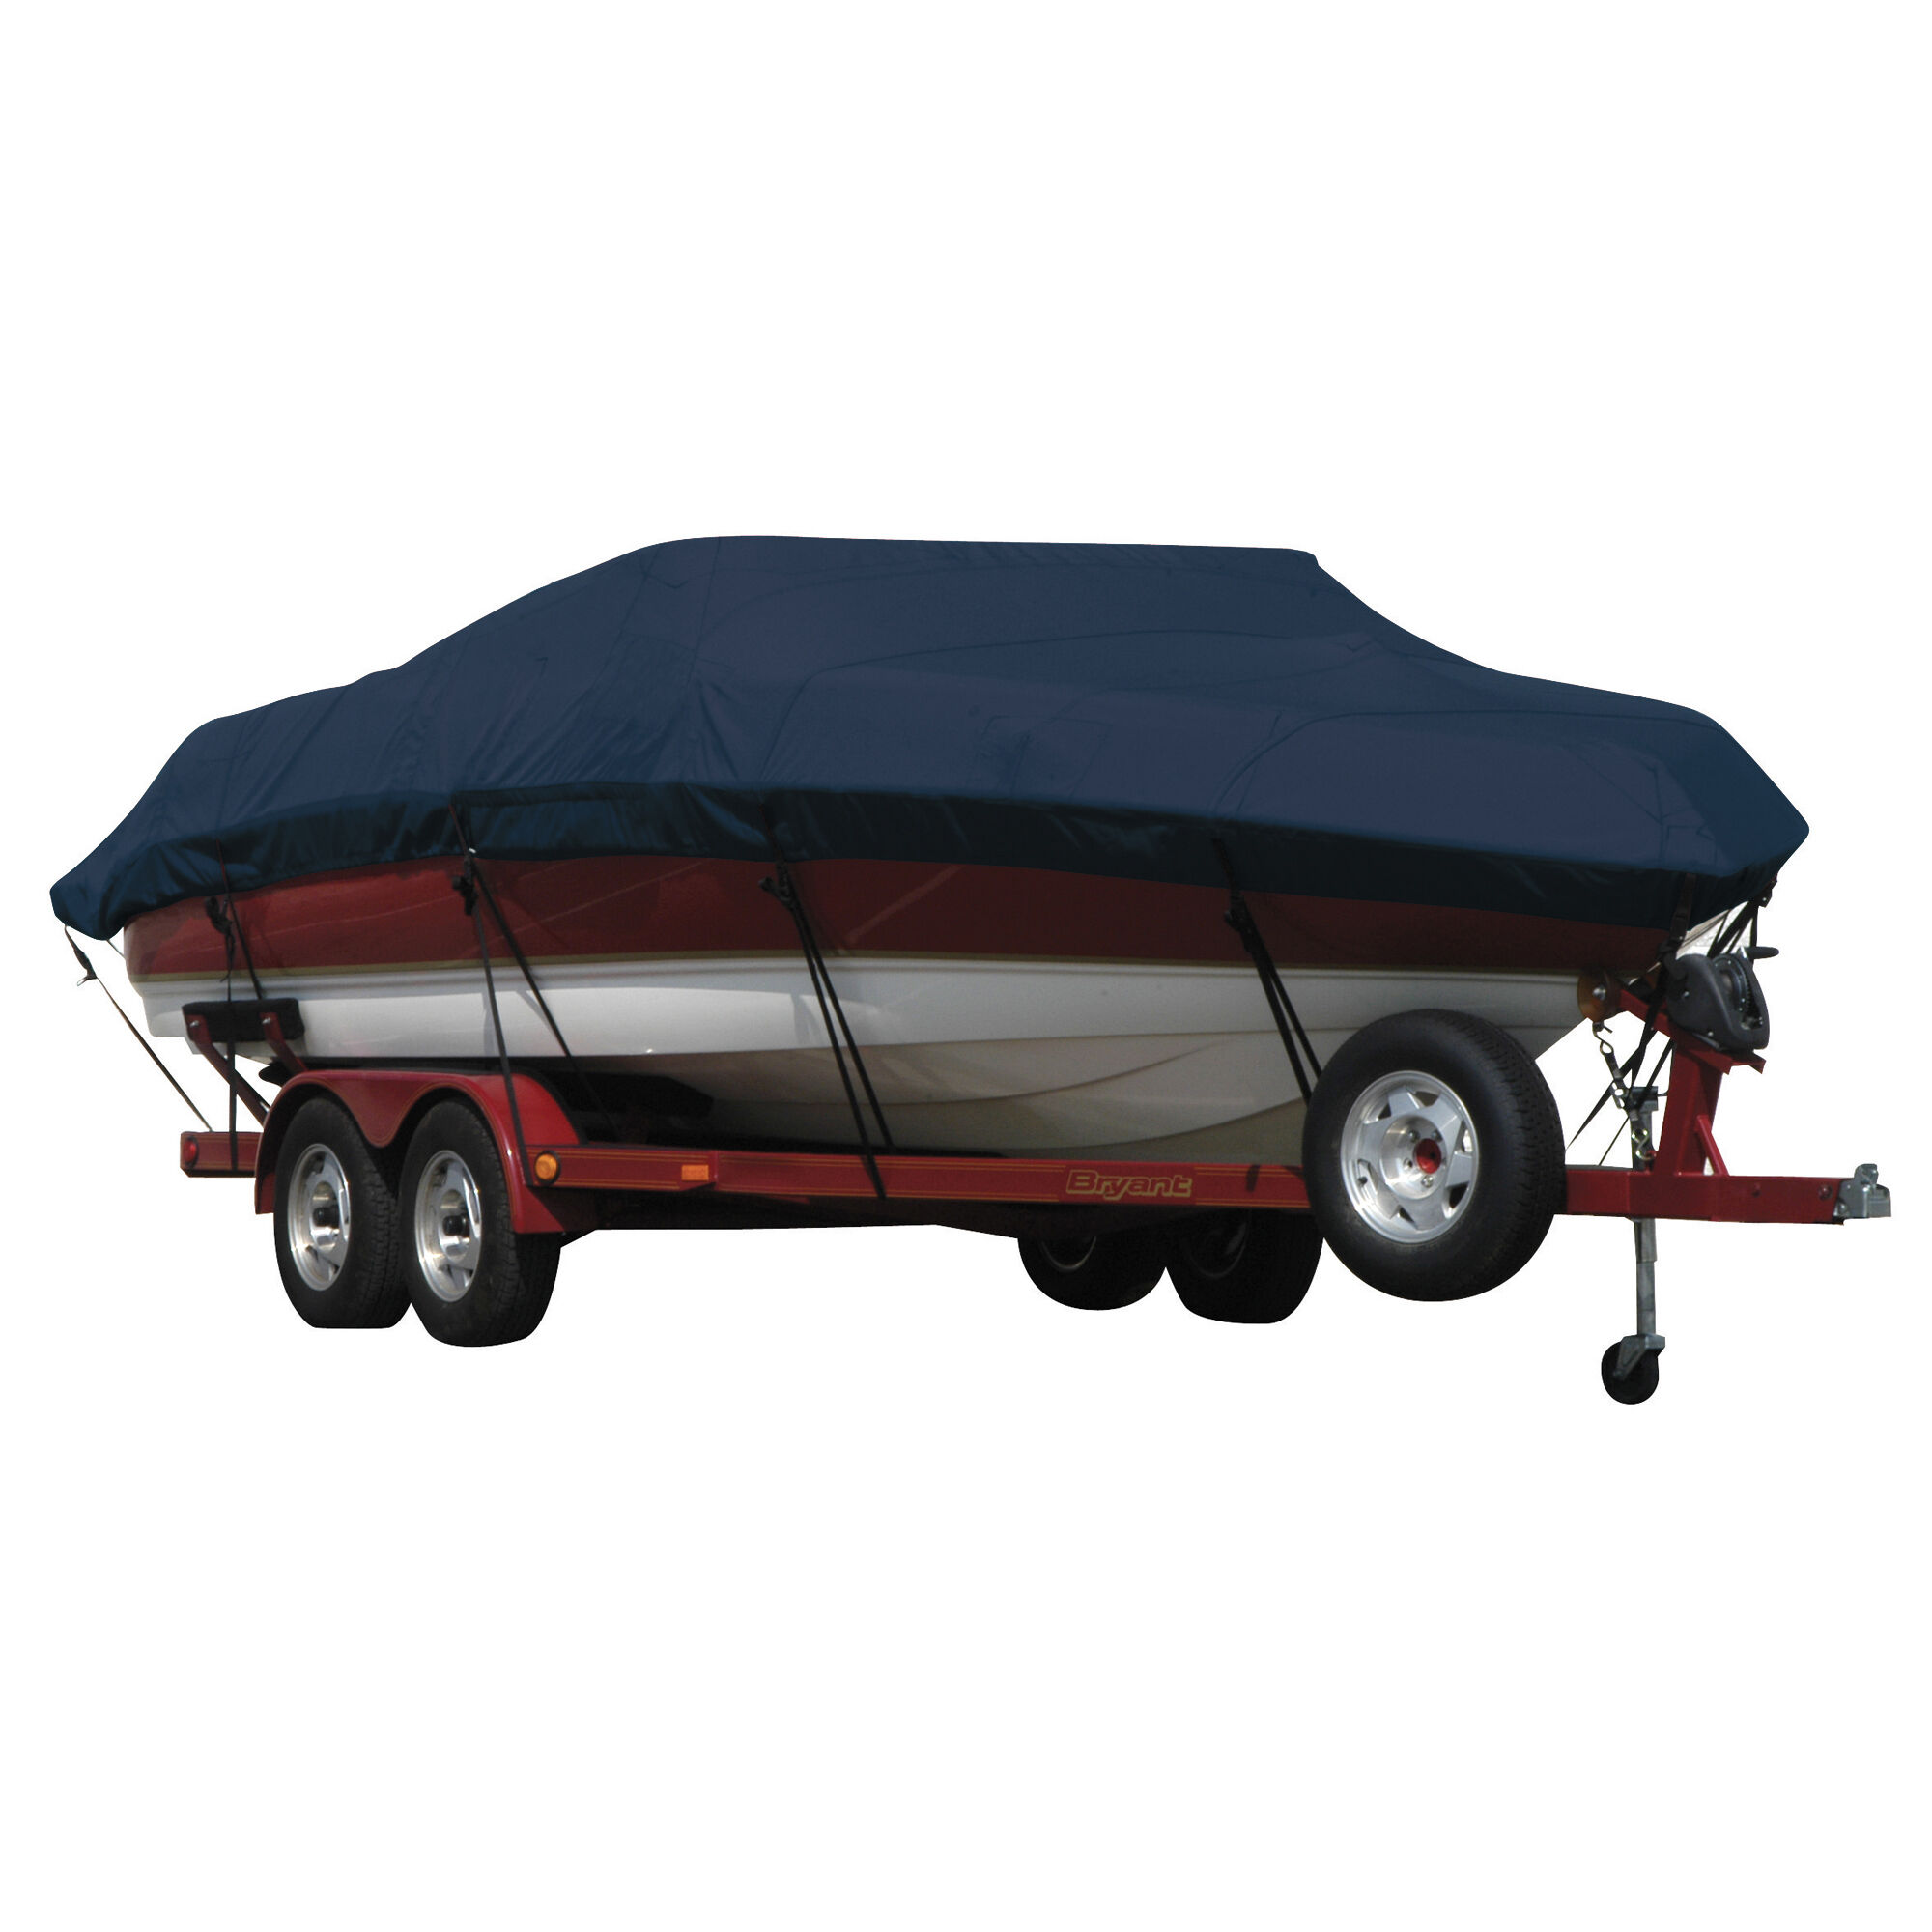 Covermate Exact Fit Sunbrella Boat Cover for Tahoe 220 220 Deck Boat Doesn't Cover Ski Tow Bar Bimini Laid Aft I/O. Navy in Navy Blue